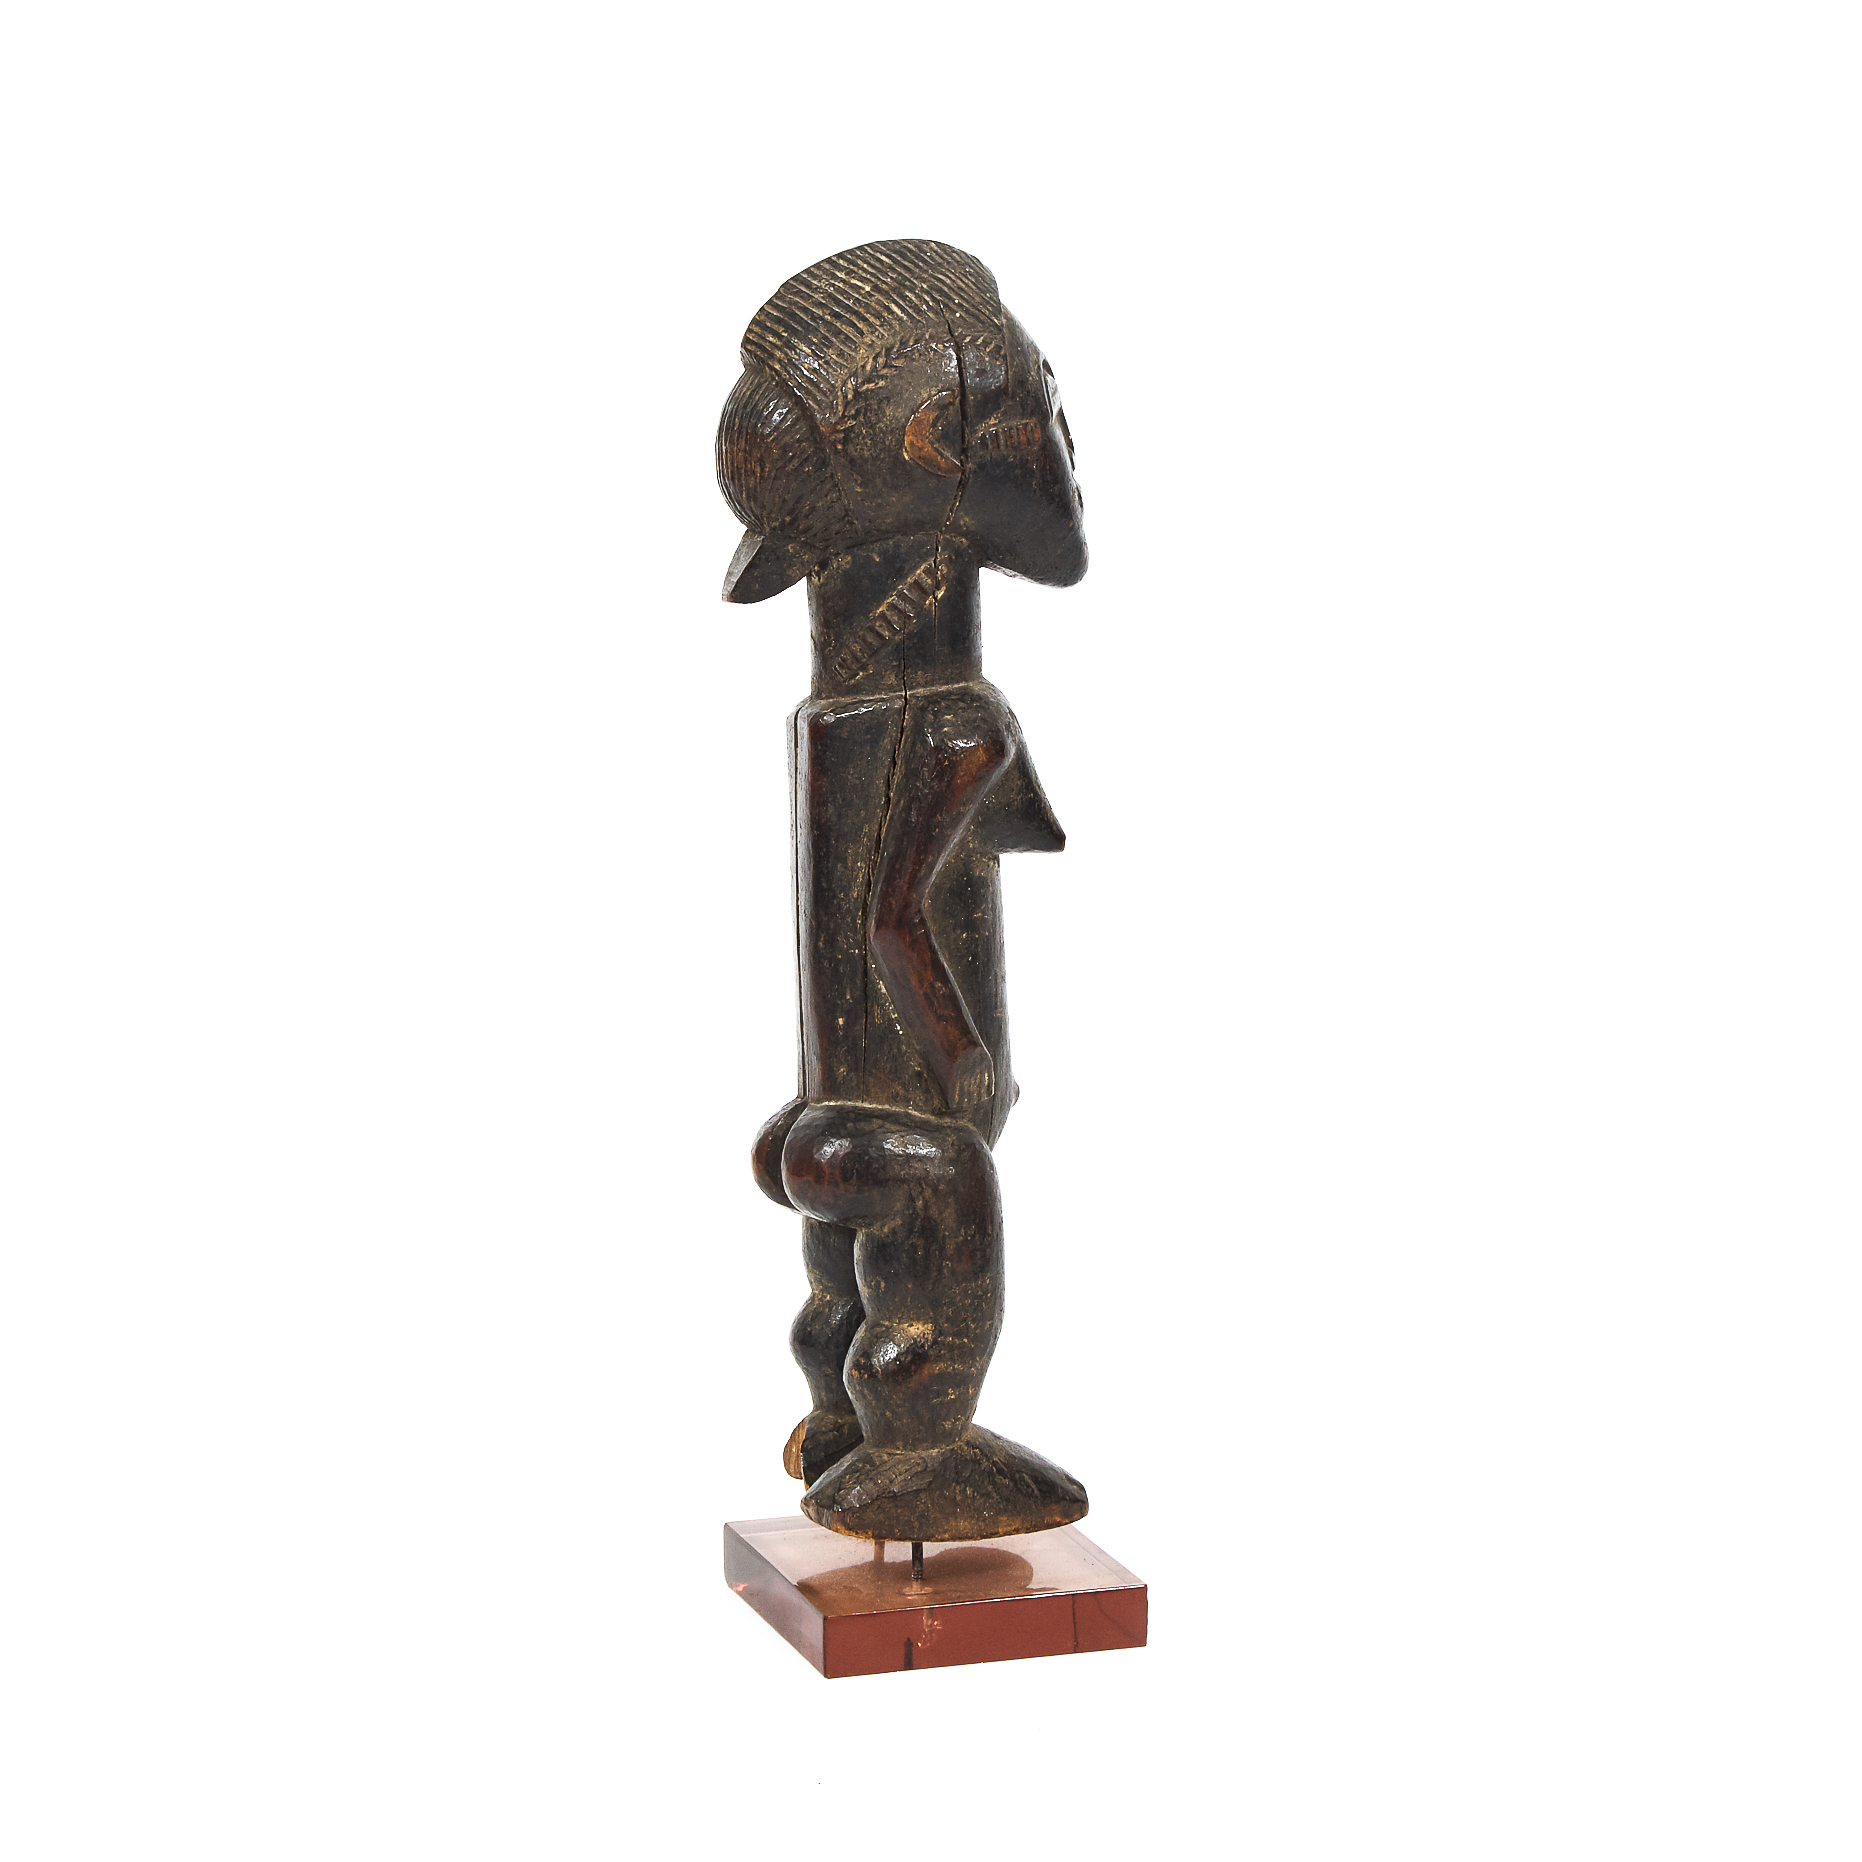 Baule Female Figure, West Africa, early to mid 20th century